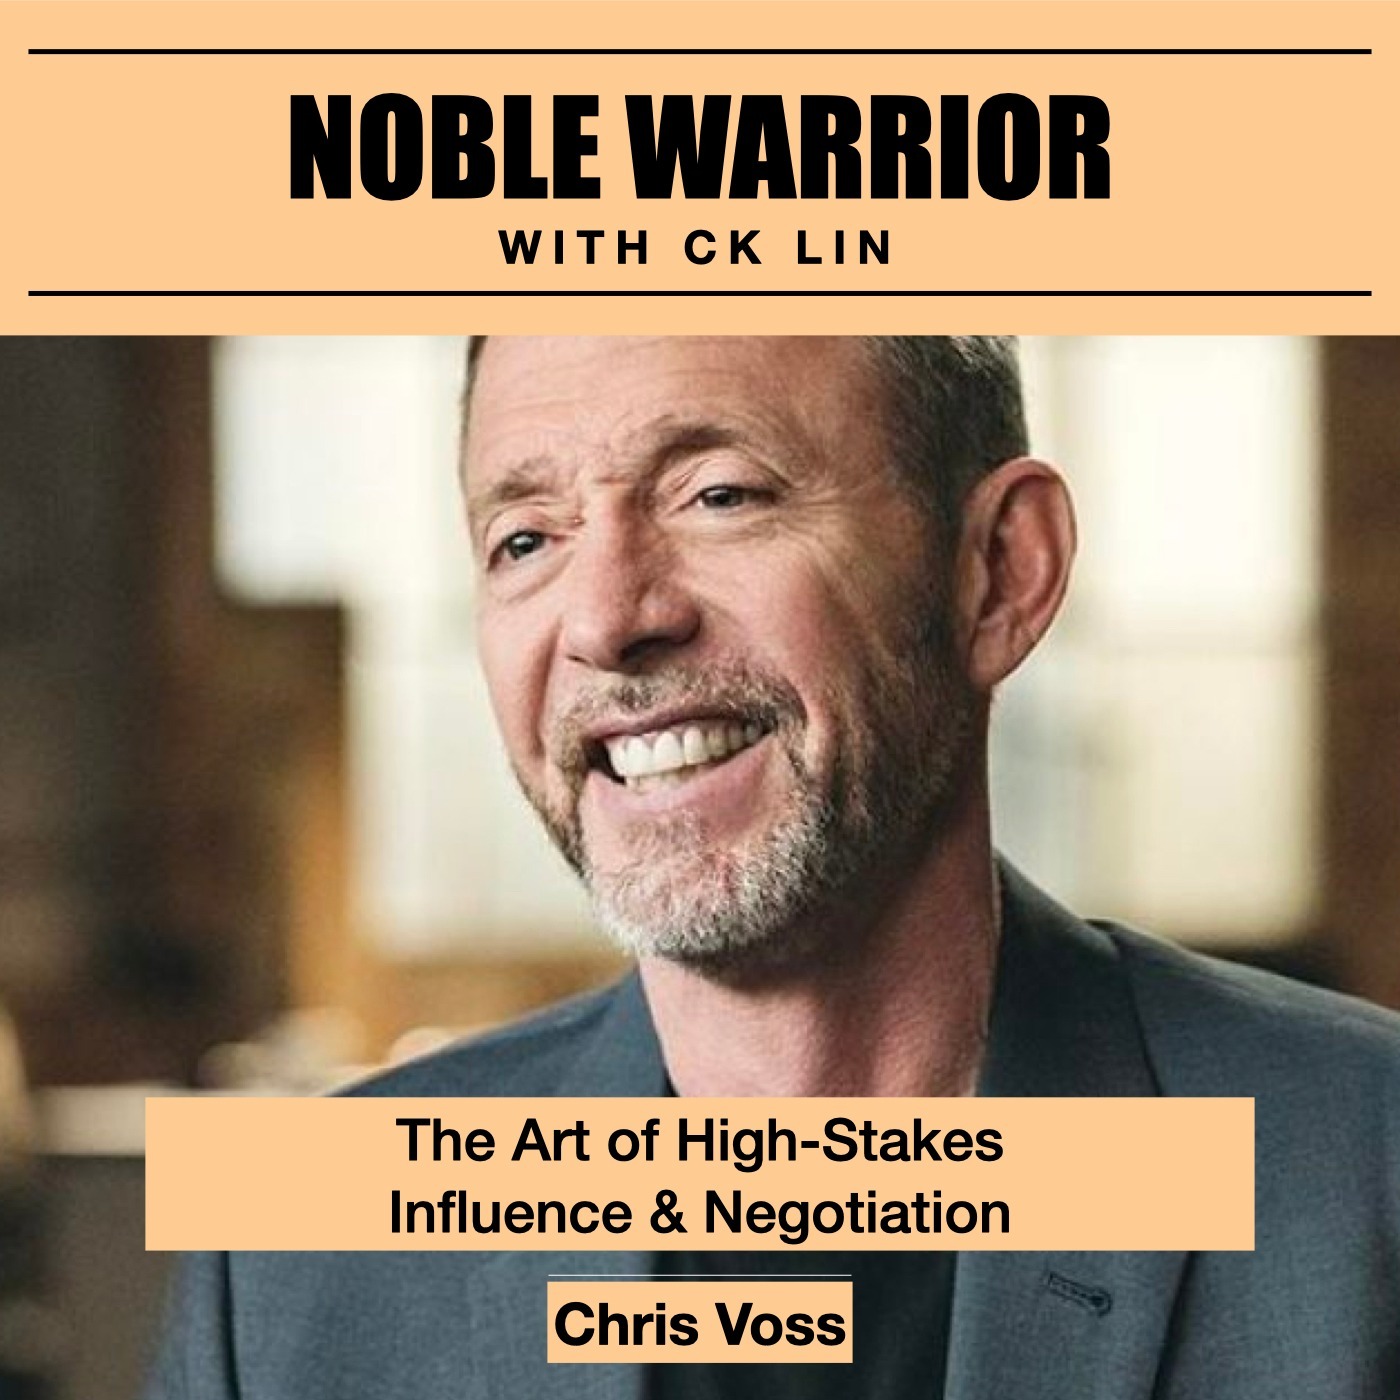 111 Chris Voss: The Art of High-Stakes Influence & Negotiation Image